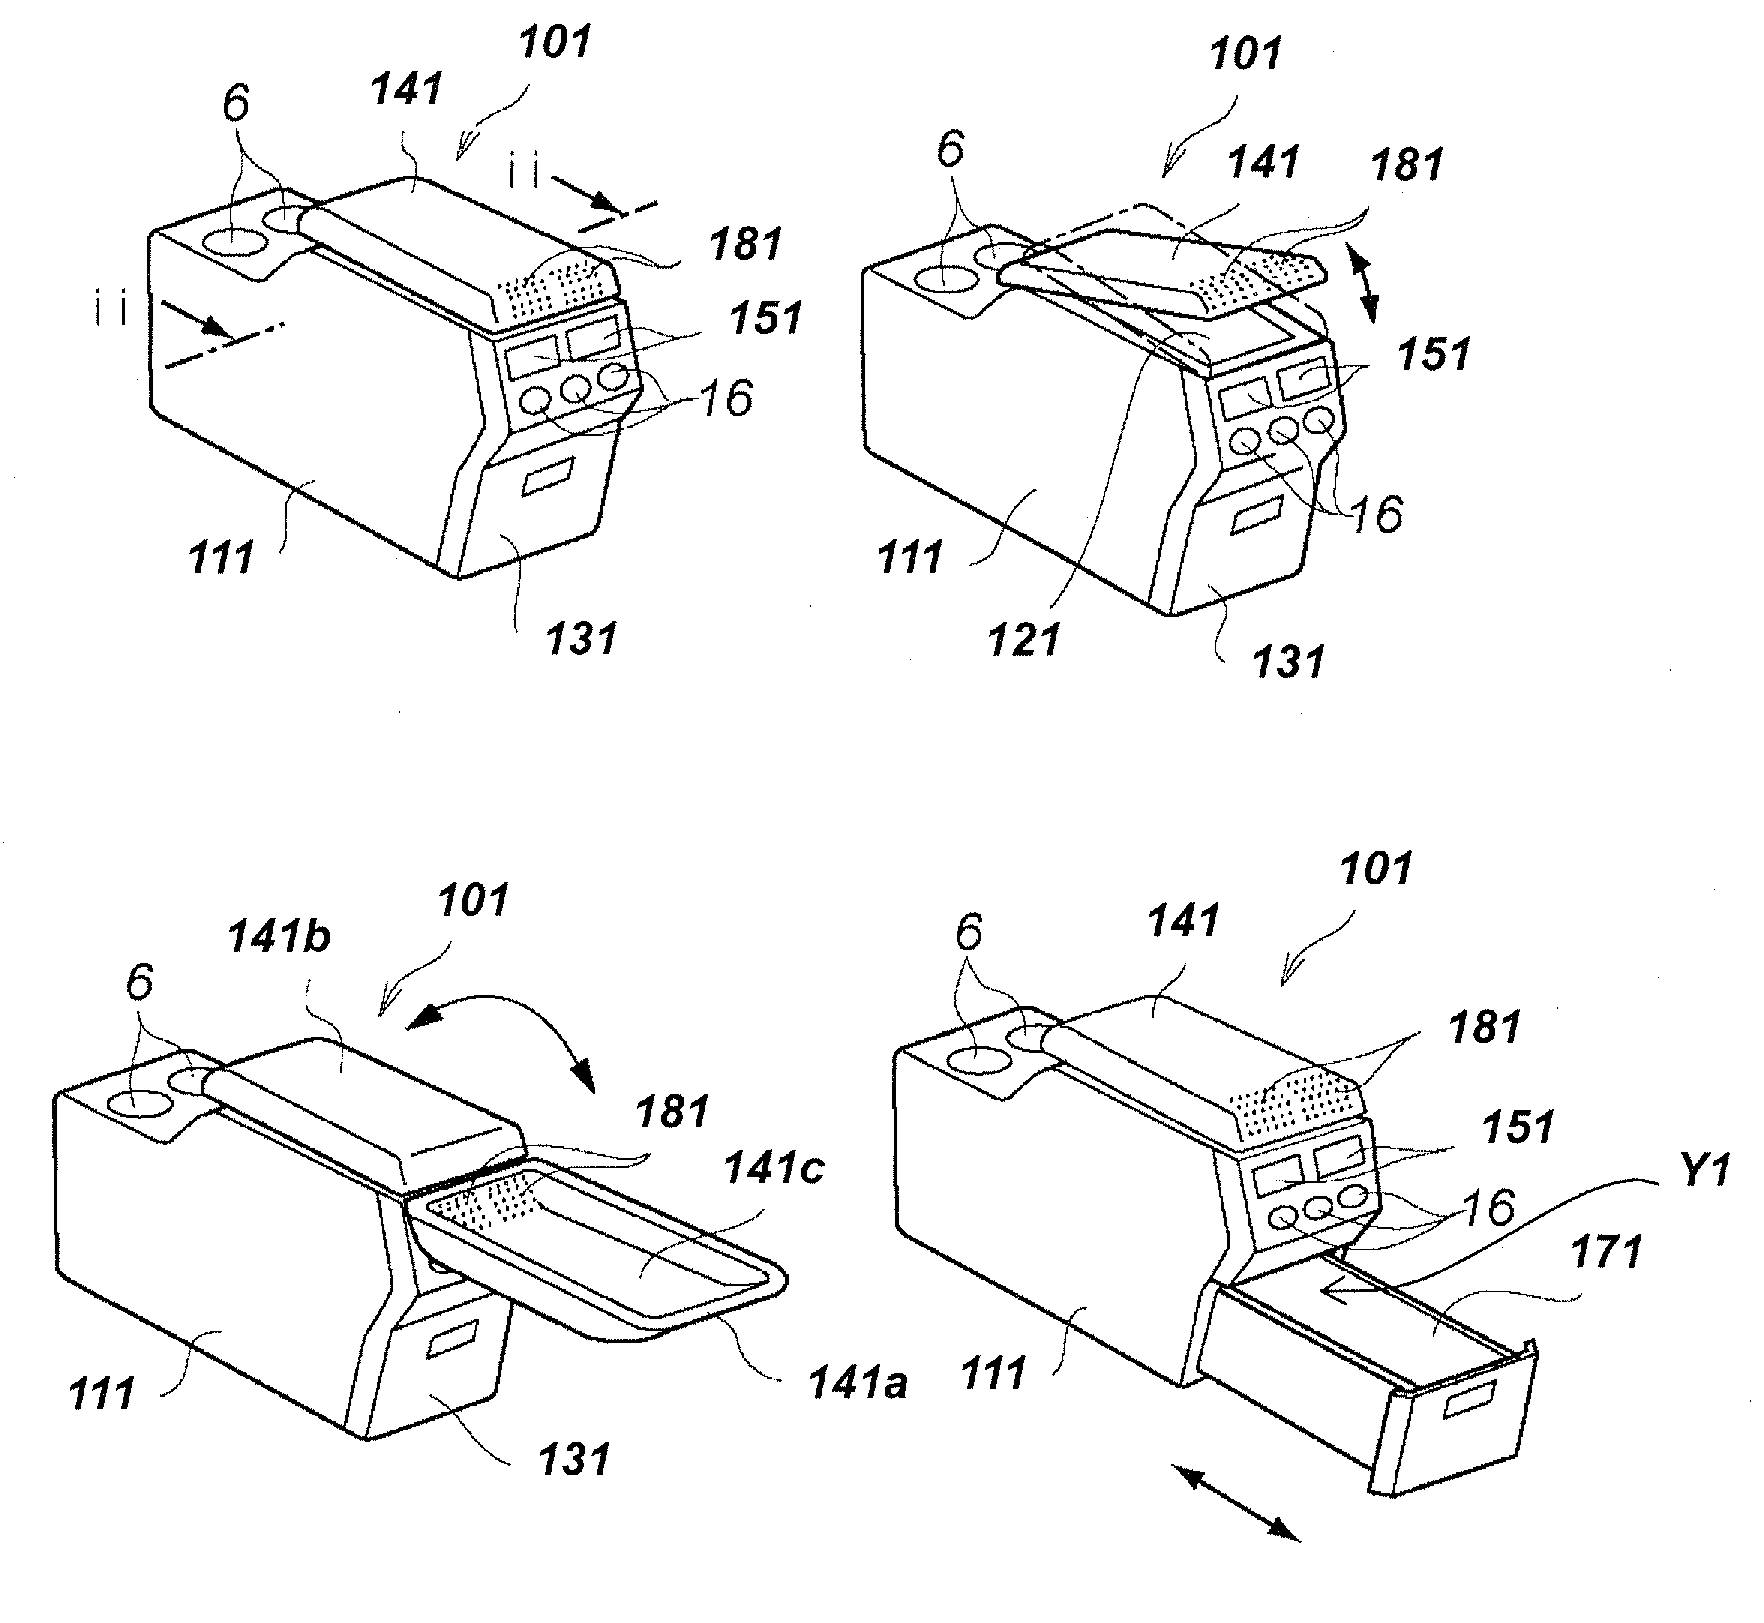 Center console structure of vehicle